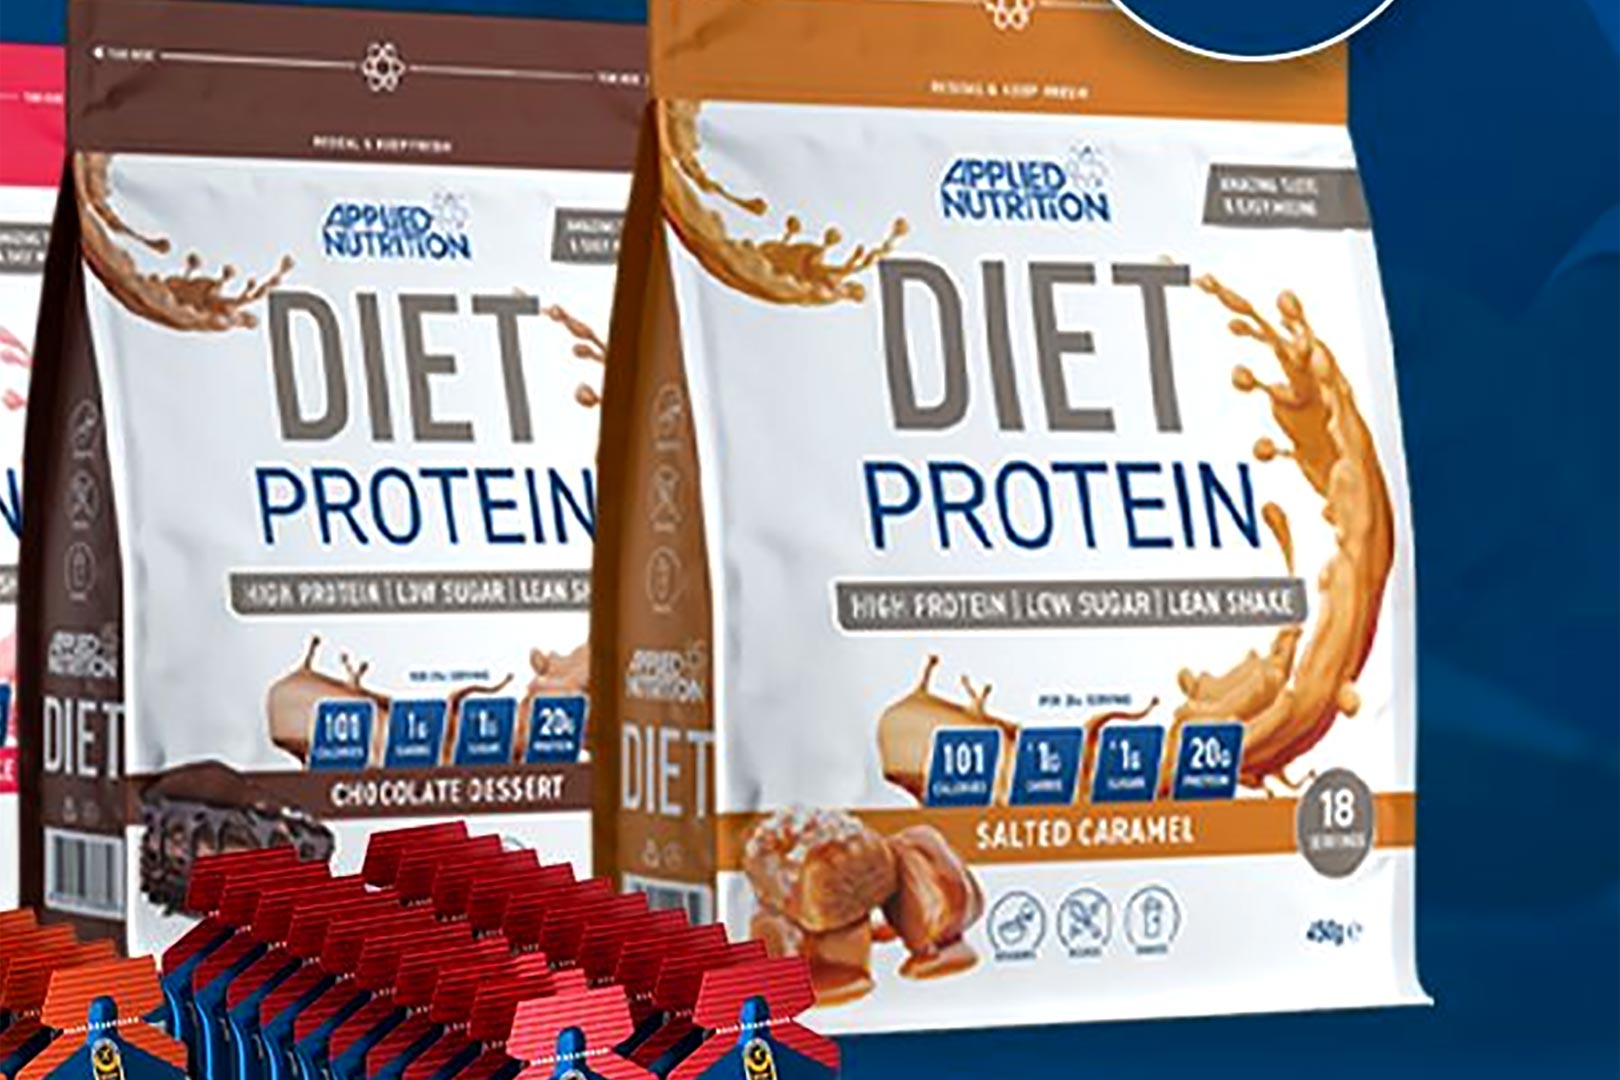 Applied Nutrition Diet Protein Now Available at ASDA! – Applied